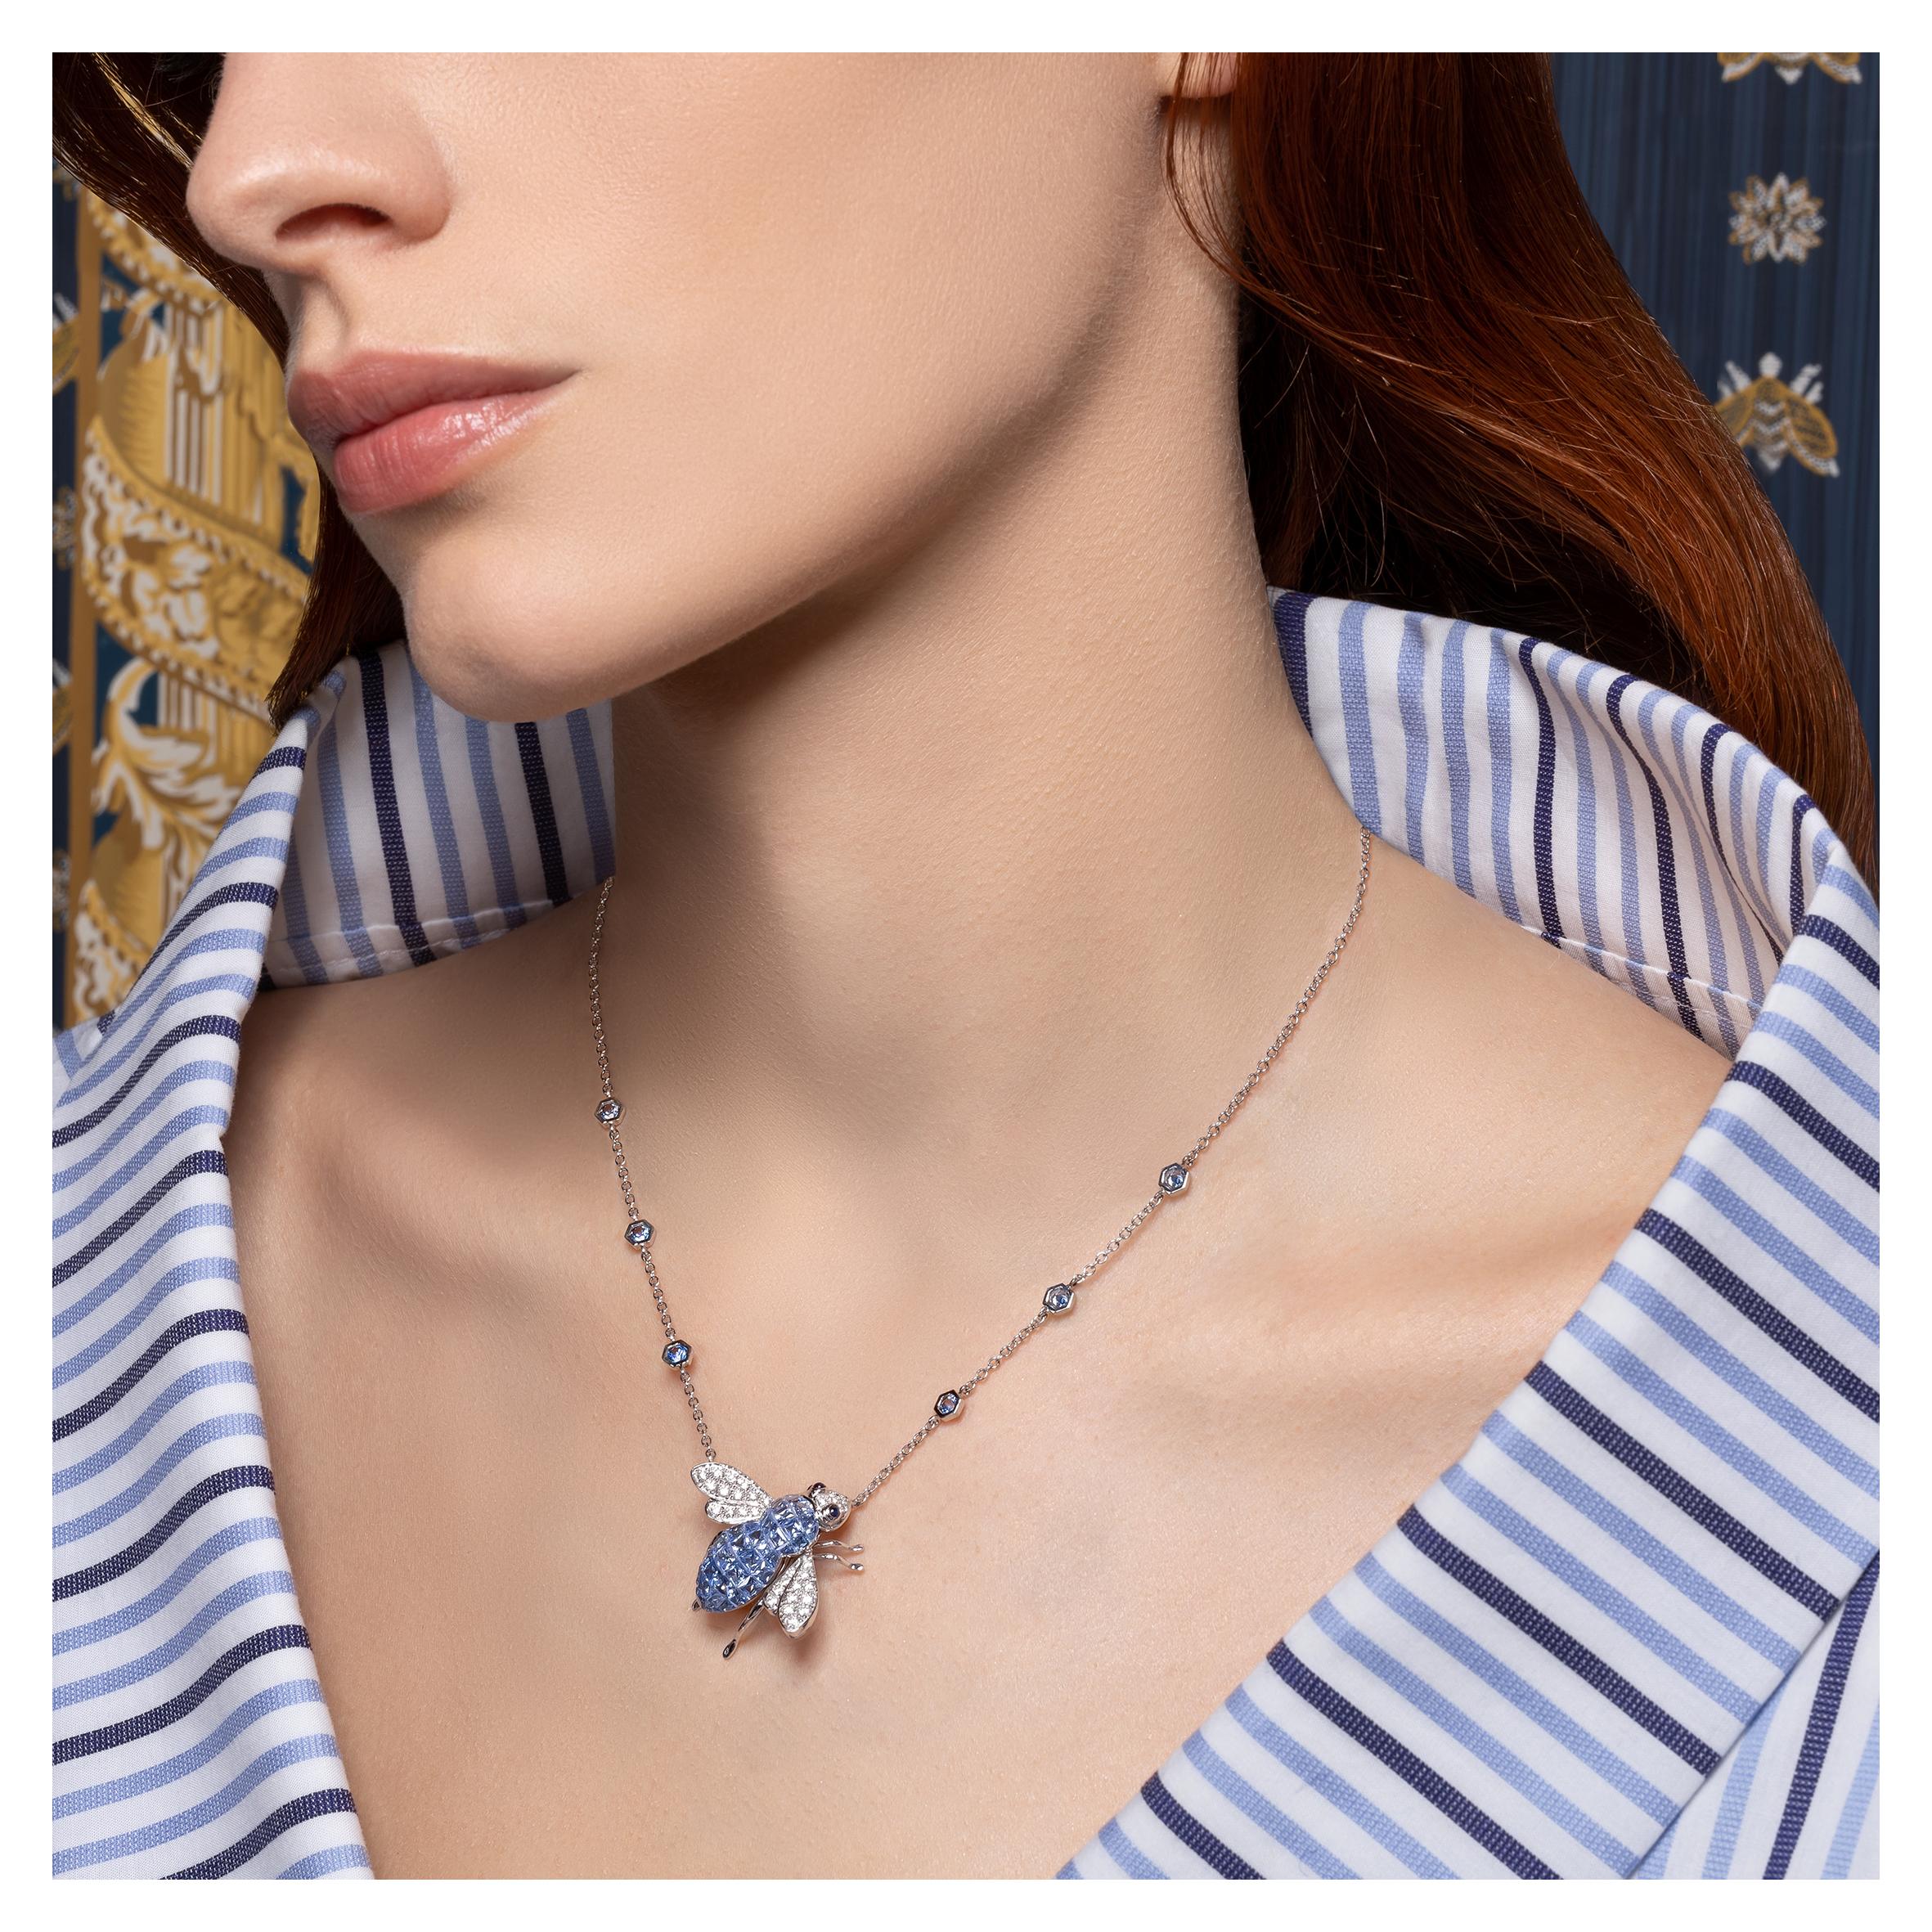 White gold and light sapphire necklace, diamond pavé and invisibly set light sapphire bee pendant.
The Bee Brooch, originally designed by Alberto Sabbadini for his wife Stefania in the 1980s, has become an icon of the maison, our most beloved